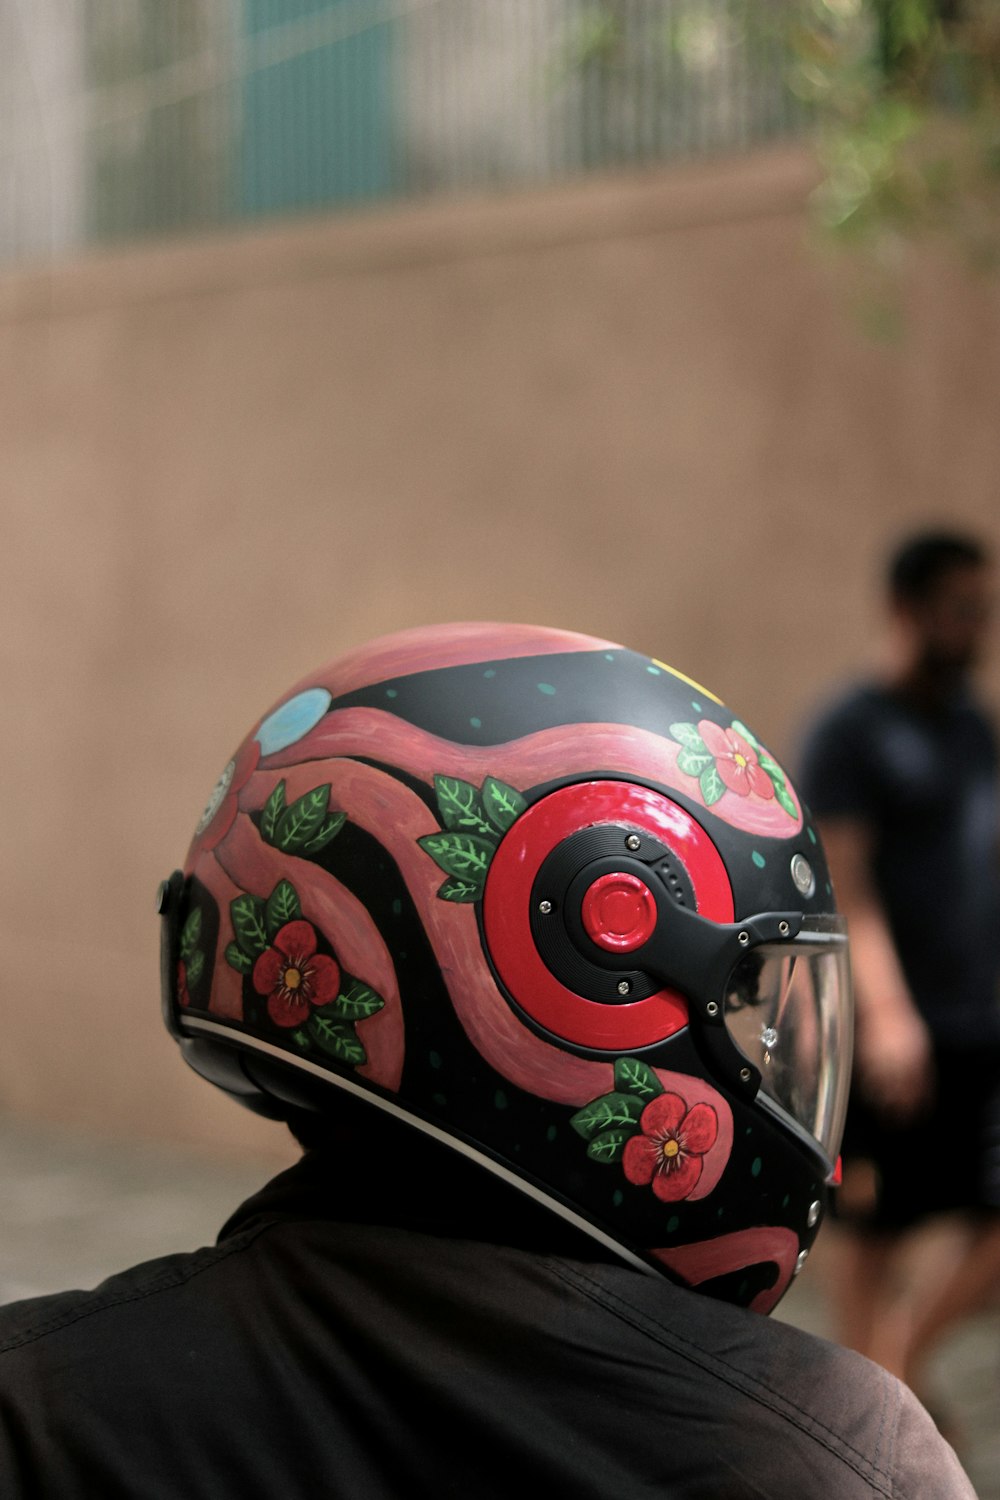 a person wearing a helmet with flowers on it